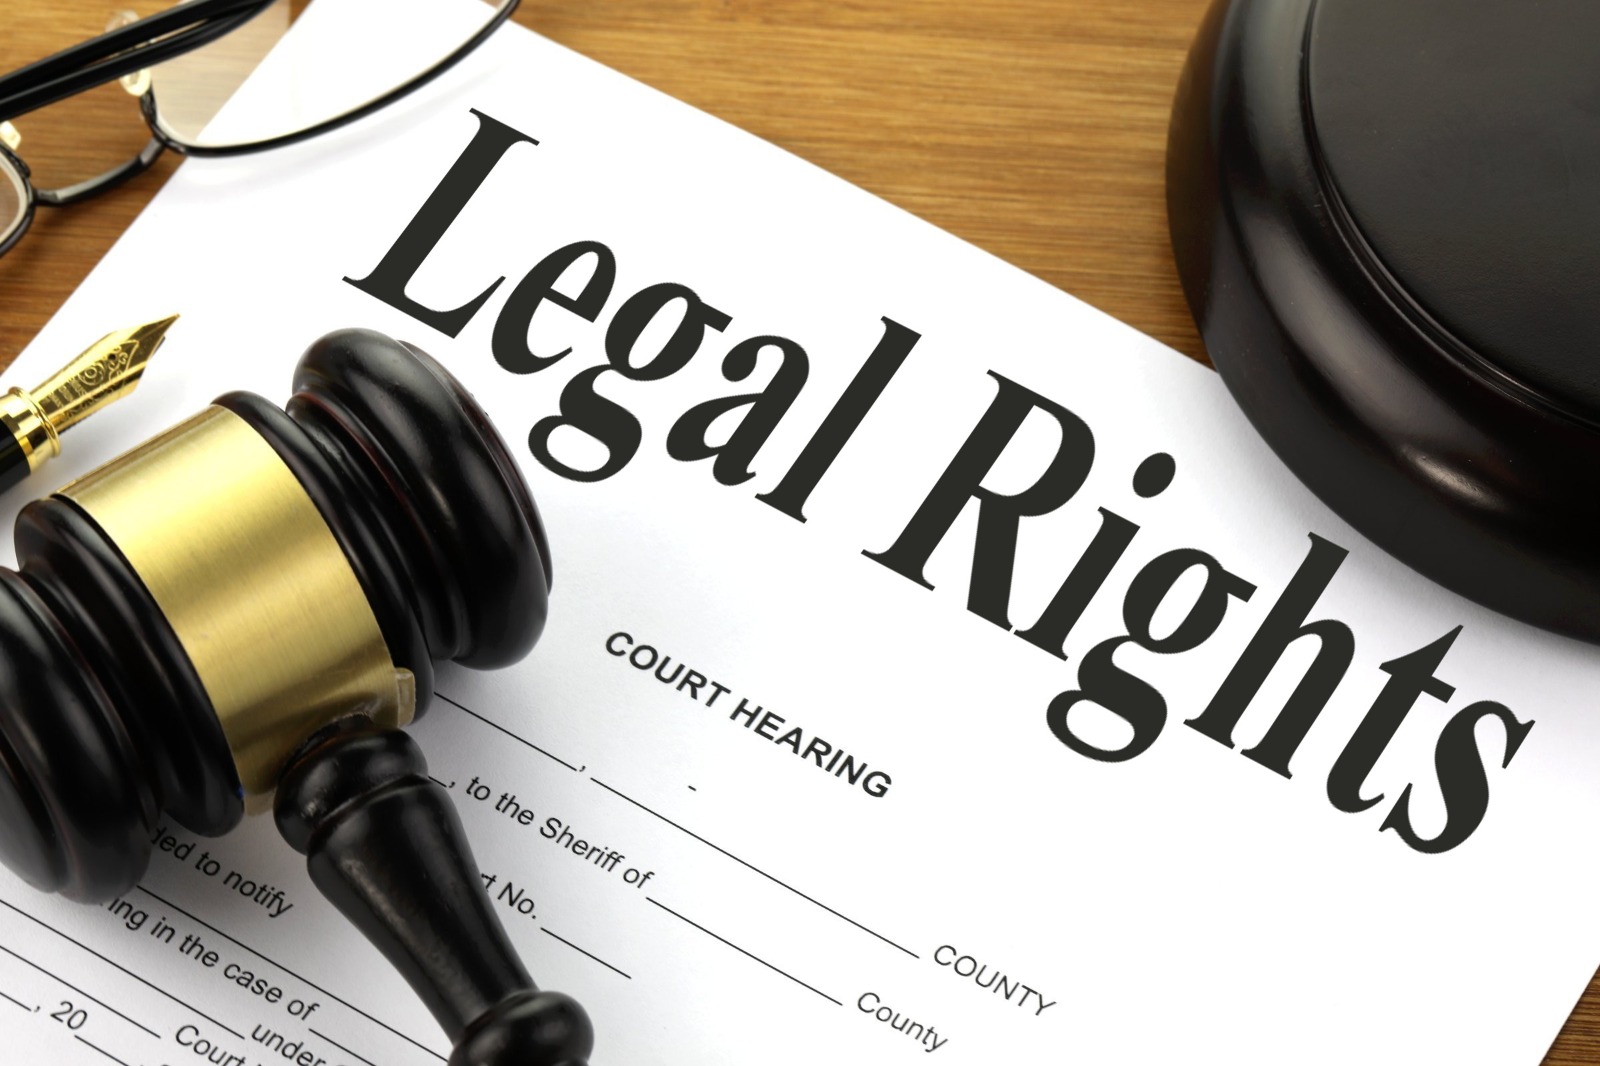 USE  OF LEGAL RIGHTS - A CONTRIBUTION TO THE FUTURE OF THE COUNTRY